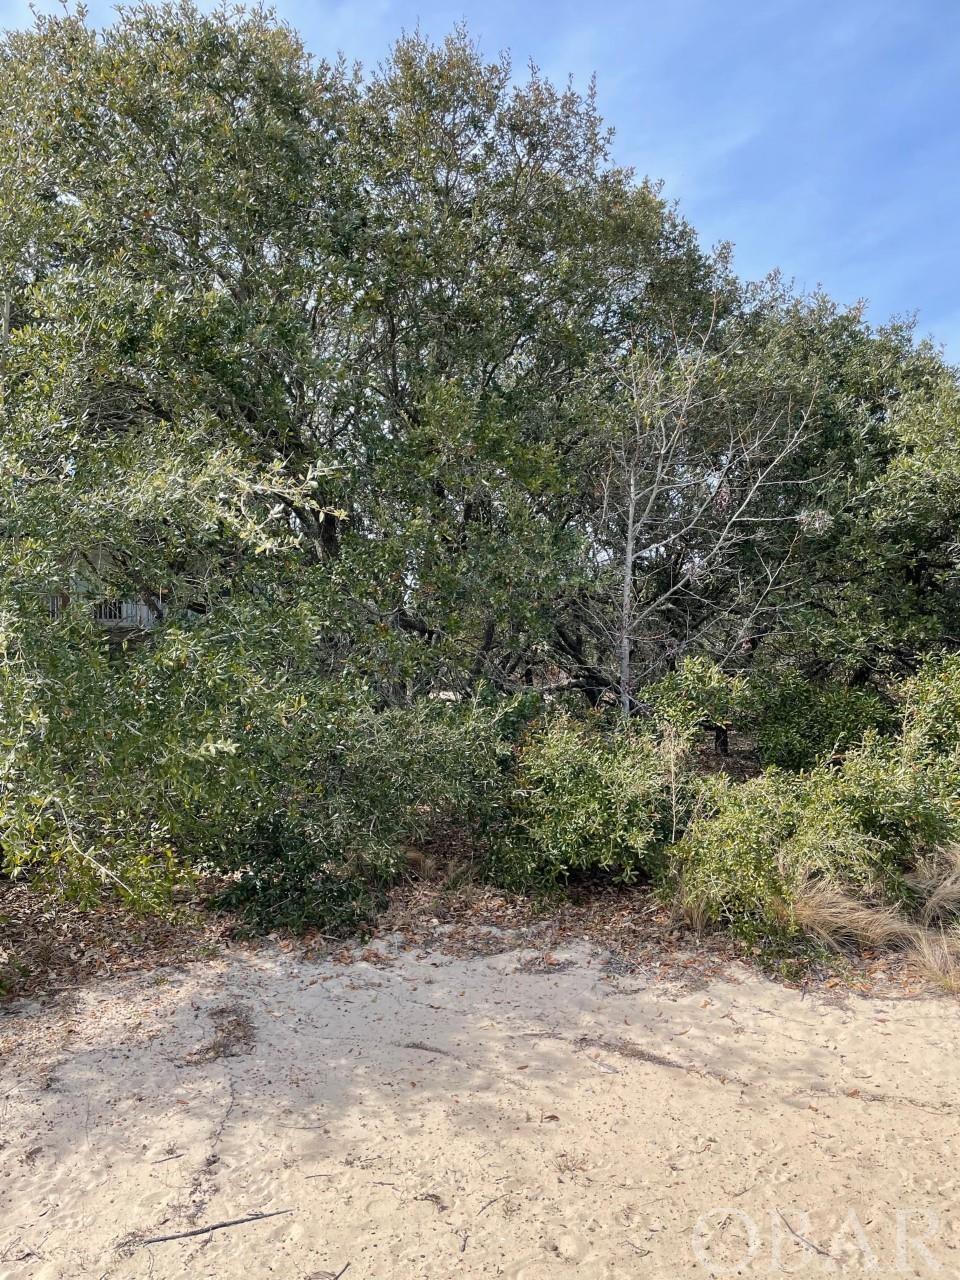 This unique lot in Ocean Sands is located in a quiet cul-de-sac in Section N. What is so unique about it? It is right next to the path that will take you to the beach access. It takes about 3 minutes to get to the beach! No neighbors right behind you and you may even have ocean views. This is a perfect spot to build your beach dream house. The lot is in X flood zone, which means that flood insurance will not be required. Ocean Sands has miles of wide, soft-sandy, lifeguarded beaches. Location is perfect with close proximity to the grocery store, shopping and numerous activities that Corolla has to offer including wild horse tours, Currituck Club Golf Course and Corolla Light Lighthouse.